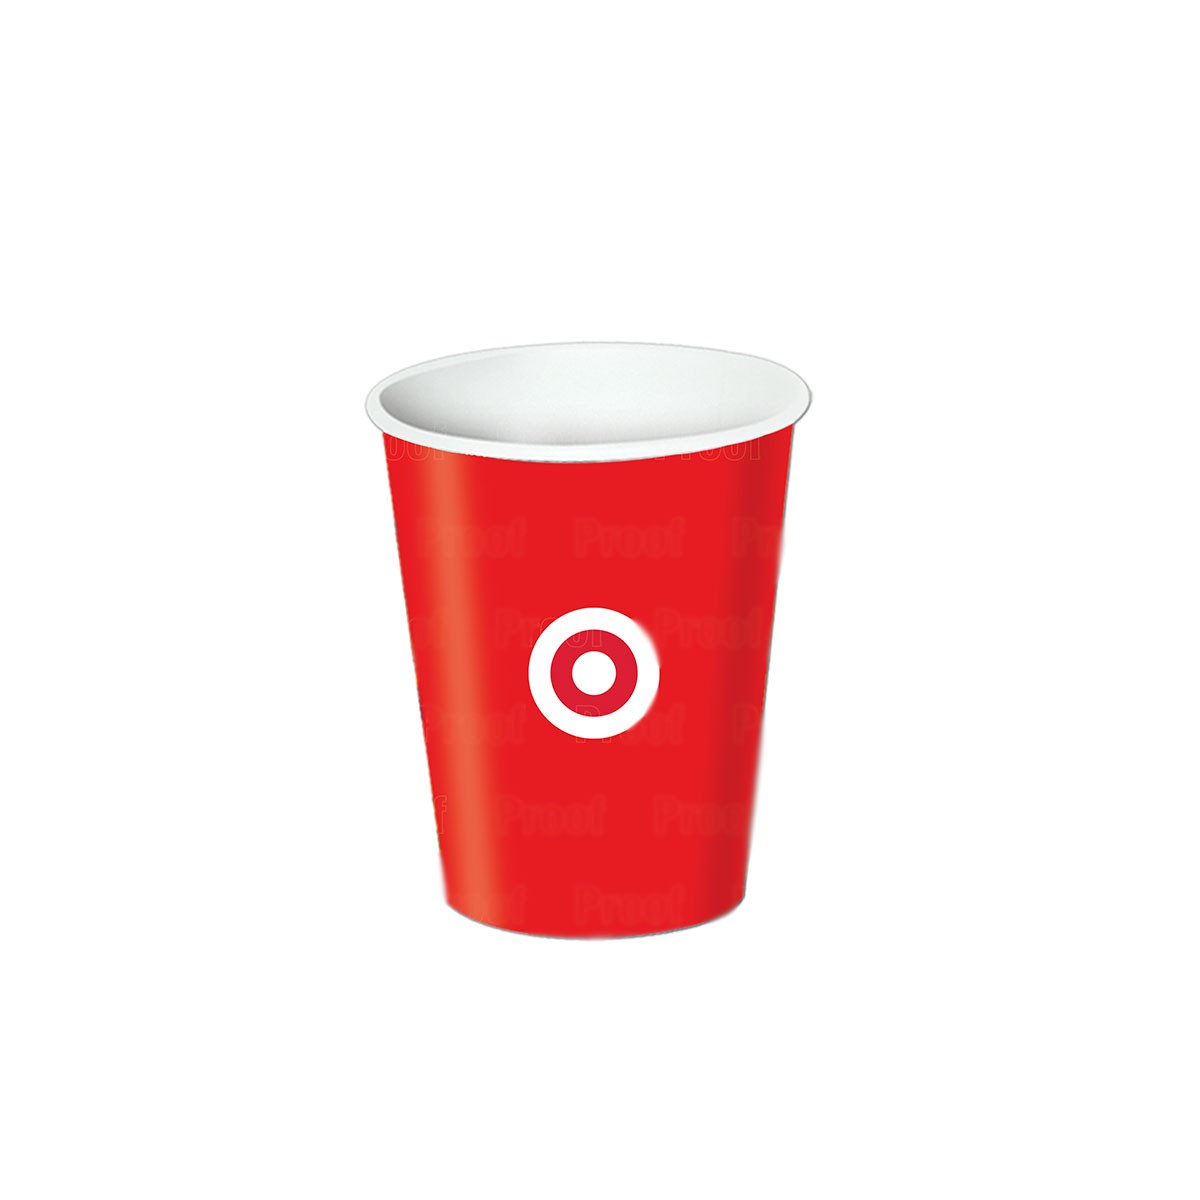 target store clipart